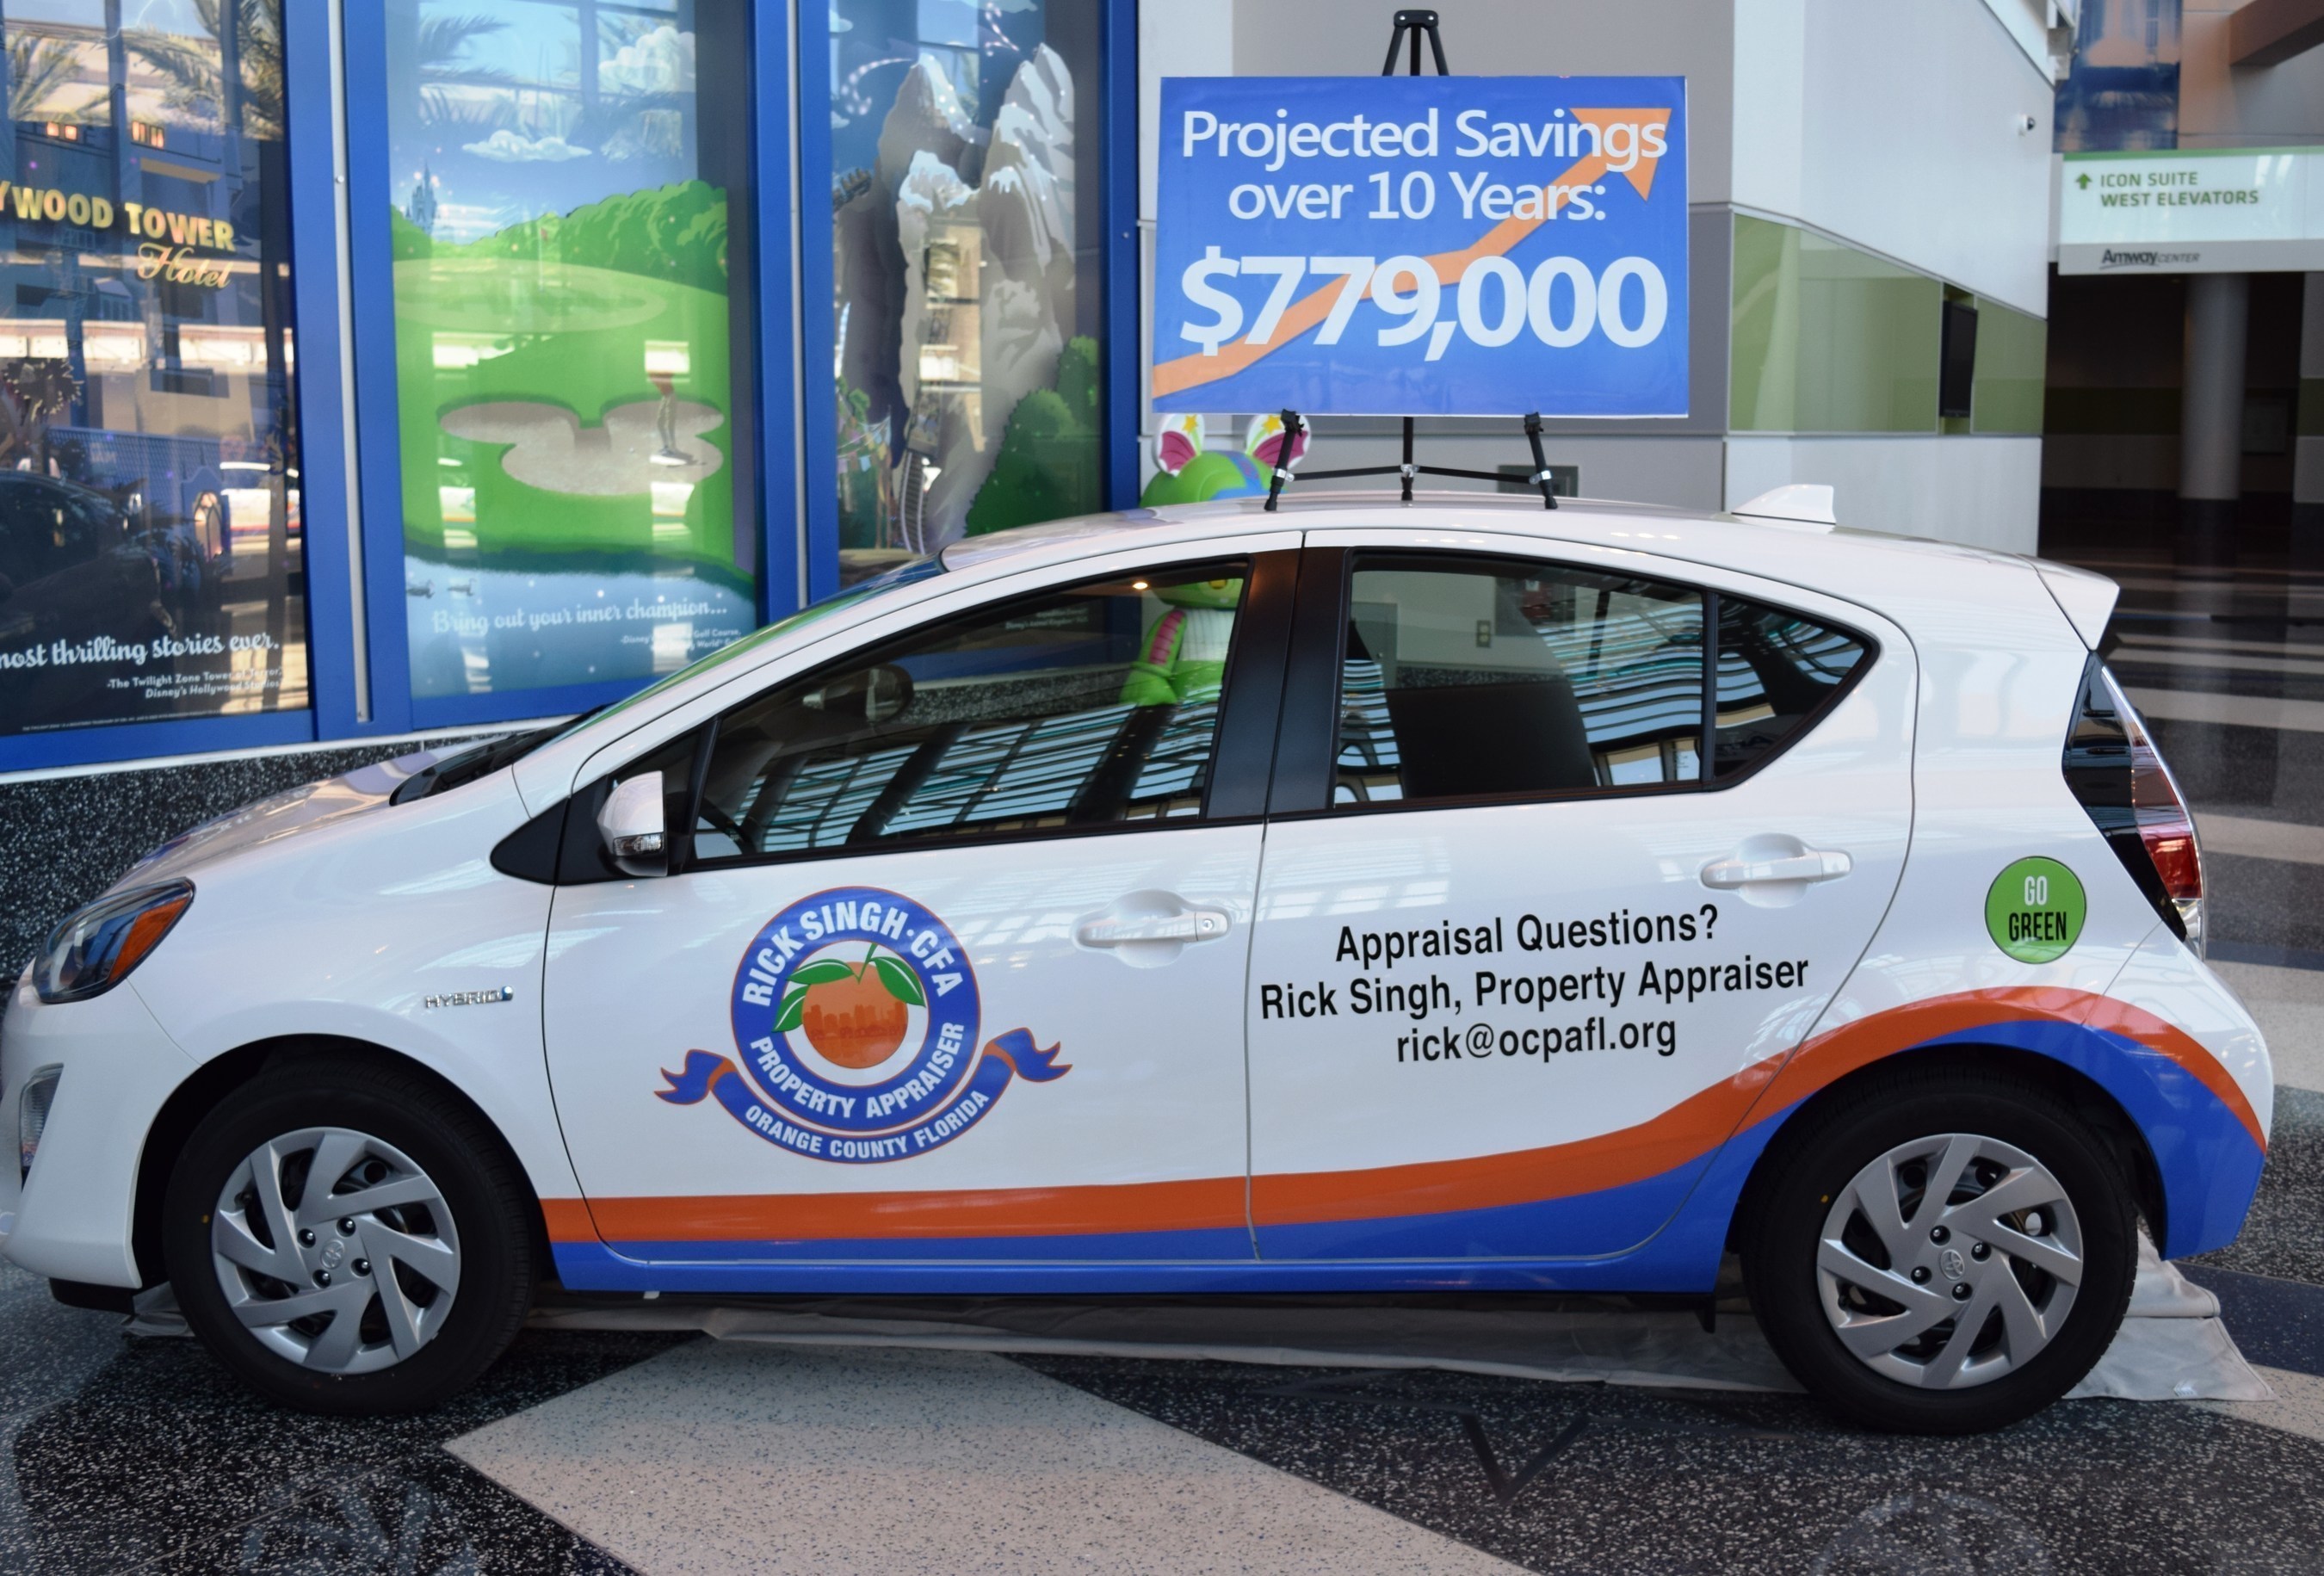 The sustainable fleet is part of the Orange County Property Appraiser's commitment to positively managing its impact on the environment and community.